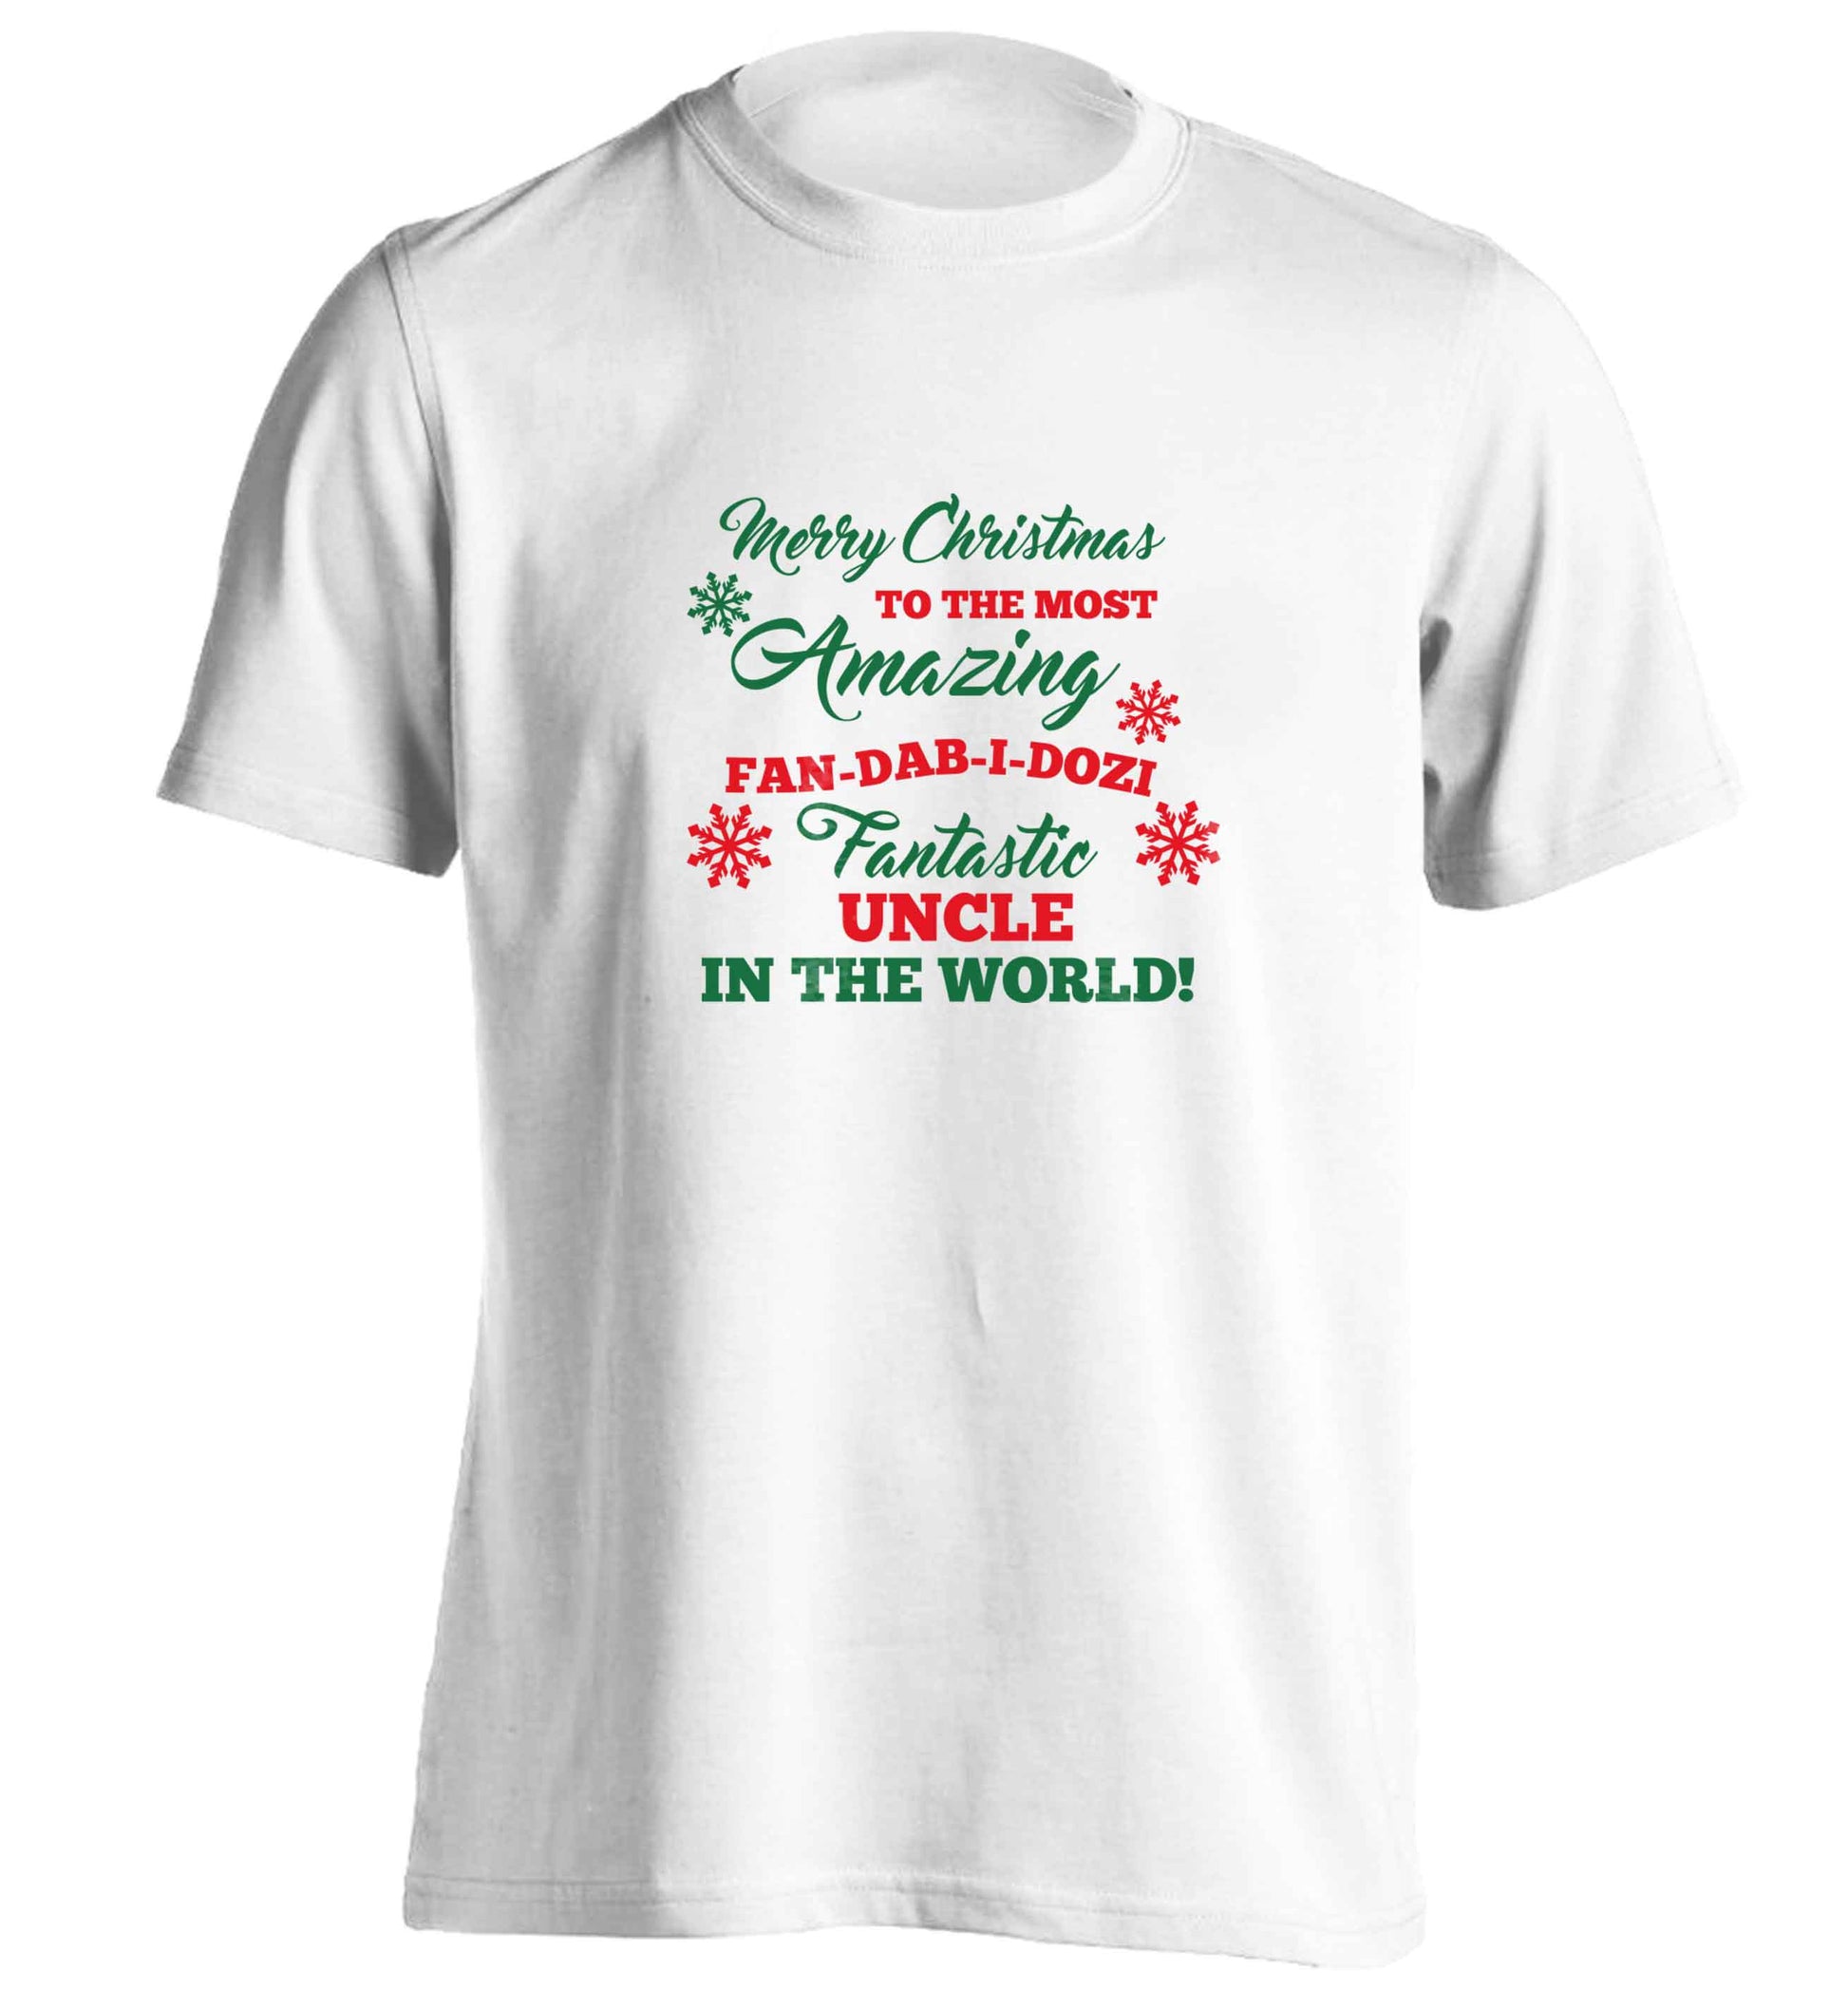 Merry Christmas to the most amazing fan-dab-i-dozi fantasic Uncle in the world adults unisex white Tshirt 2XL